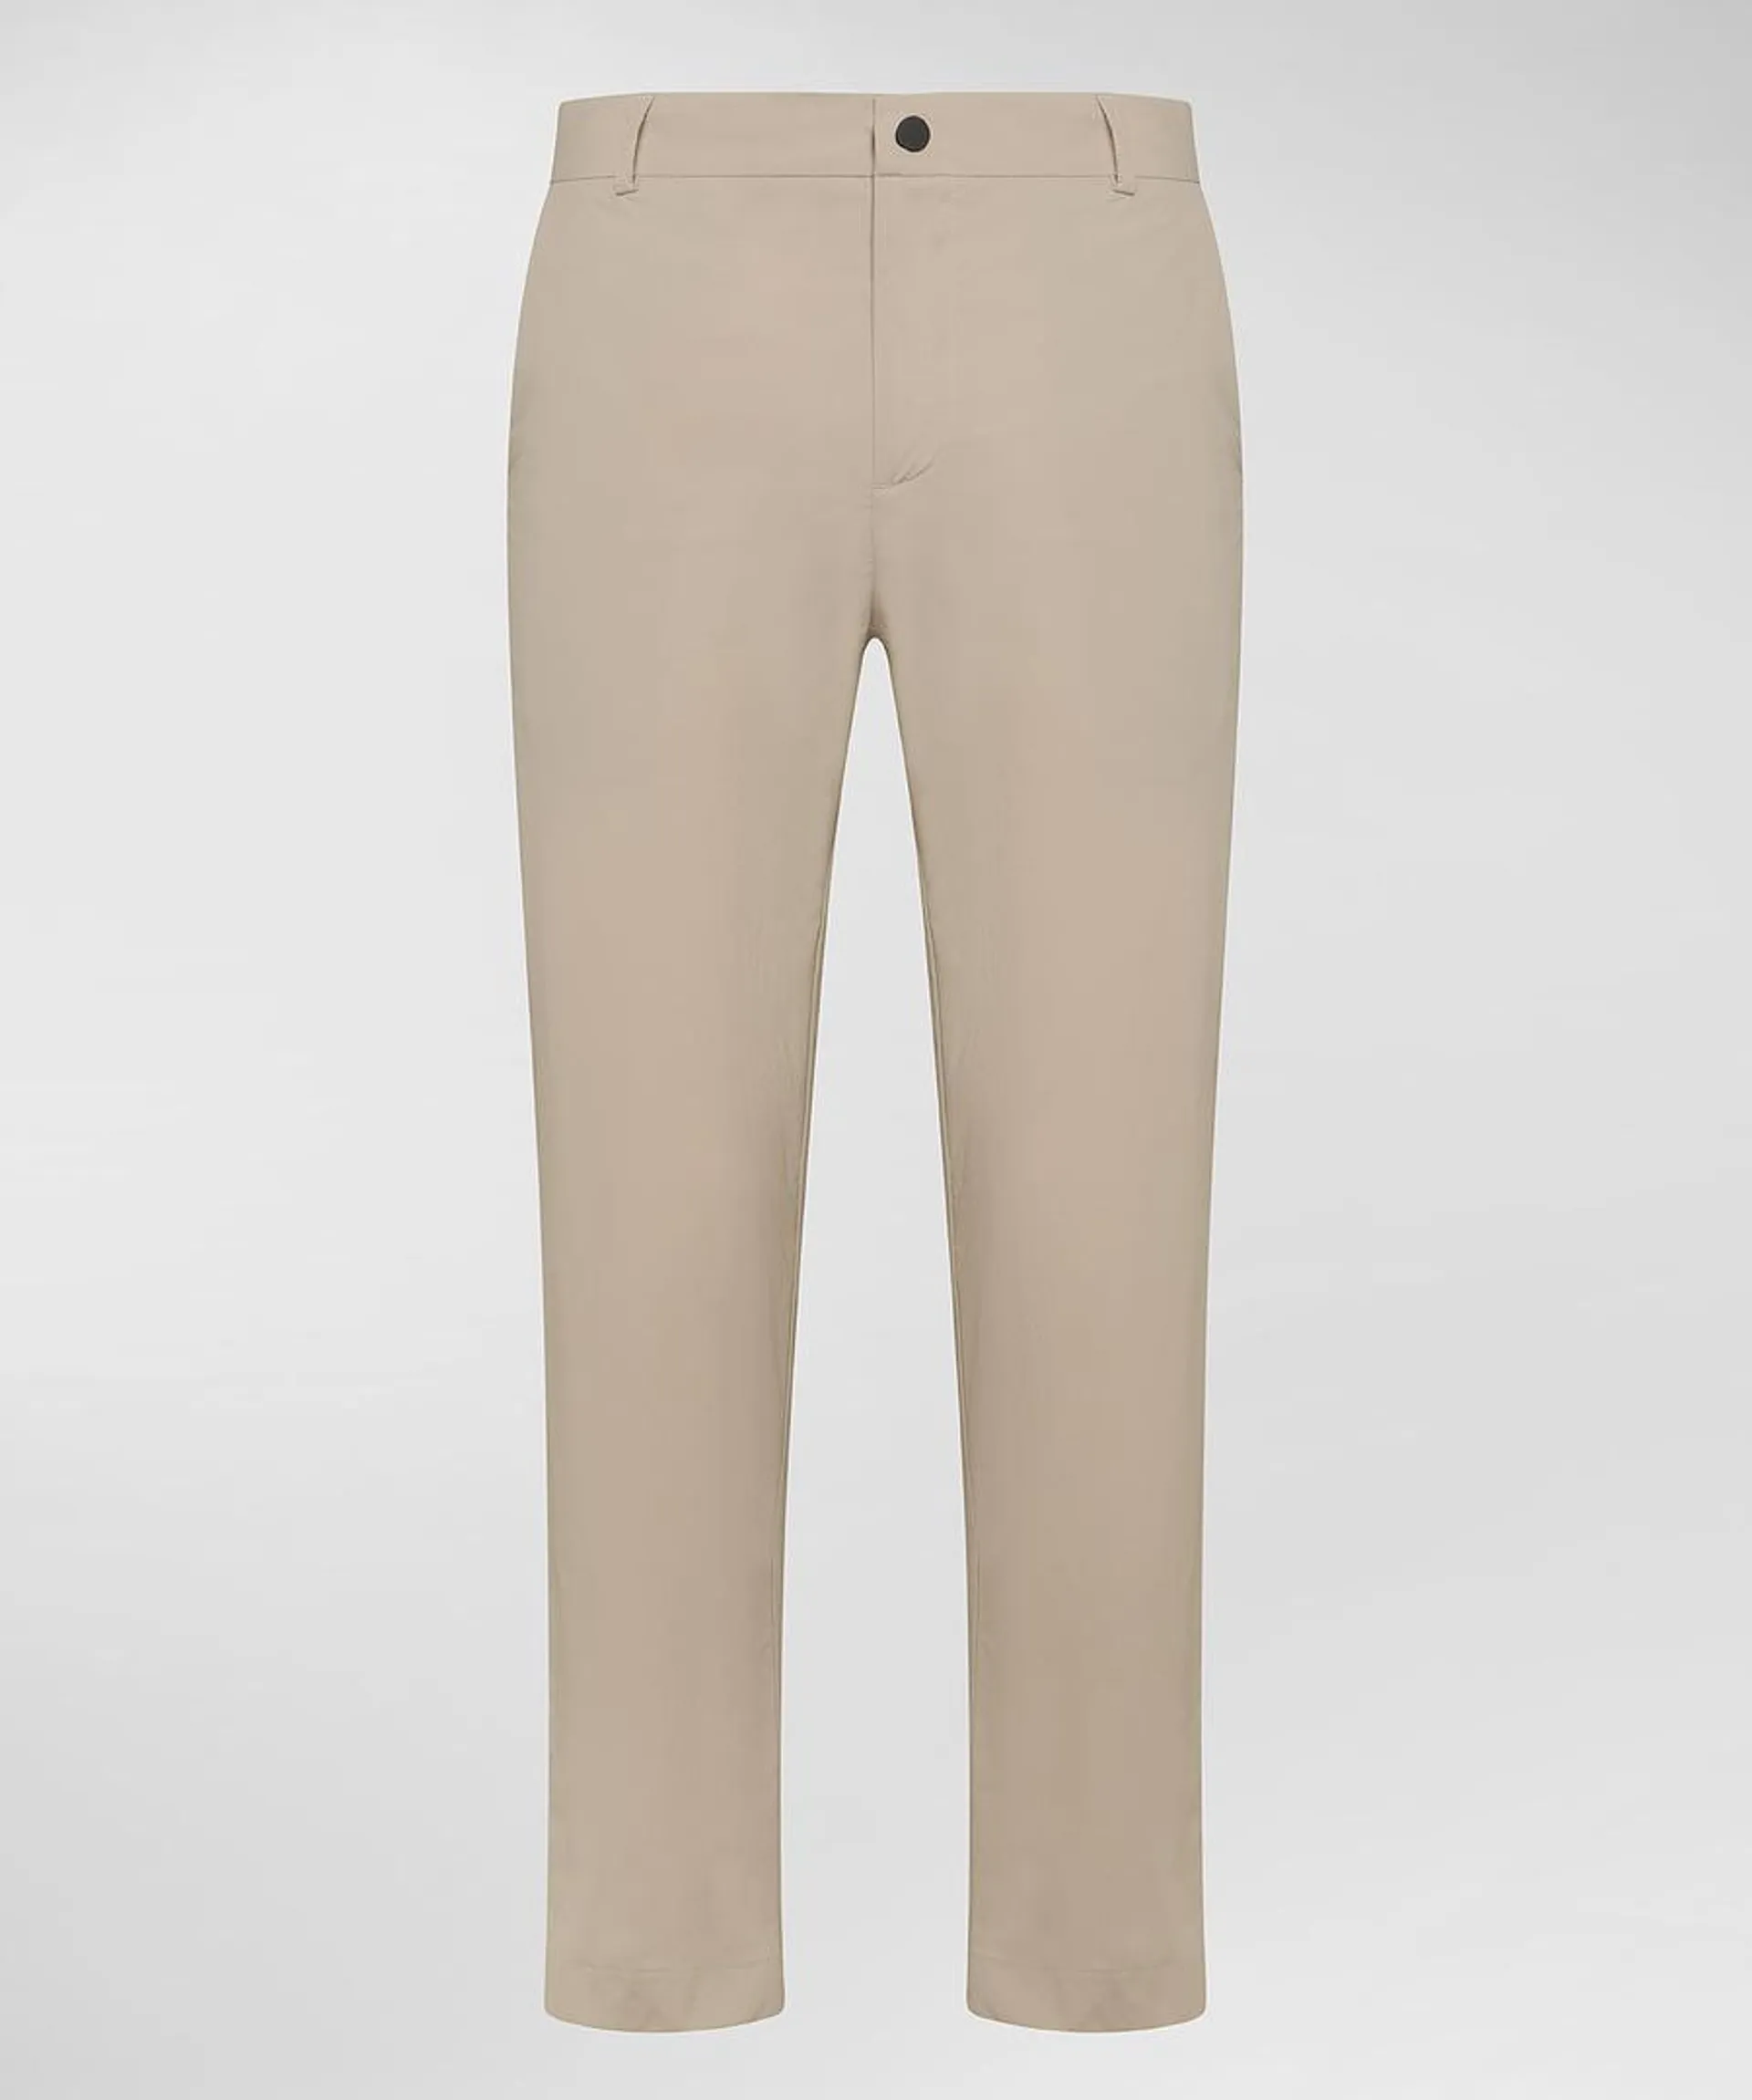 Stretch performance trousers